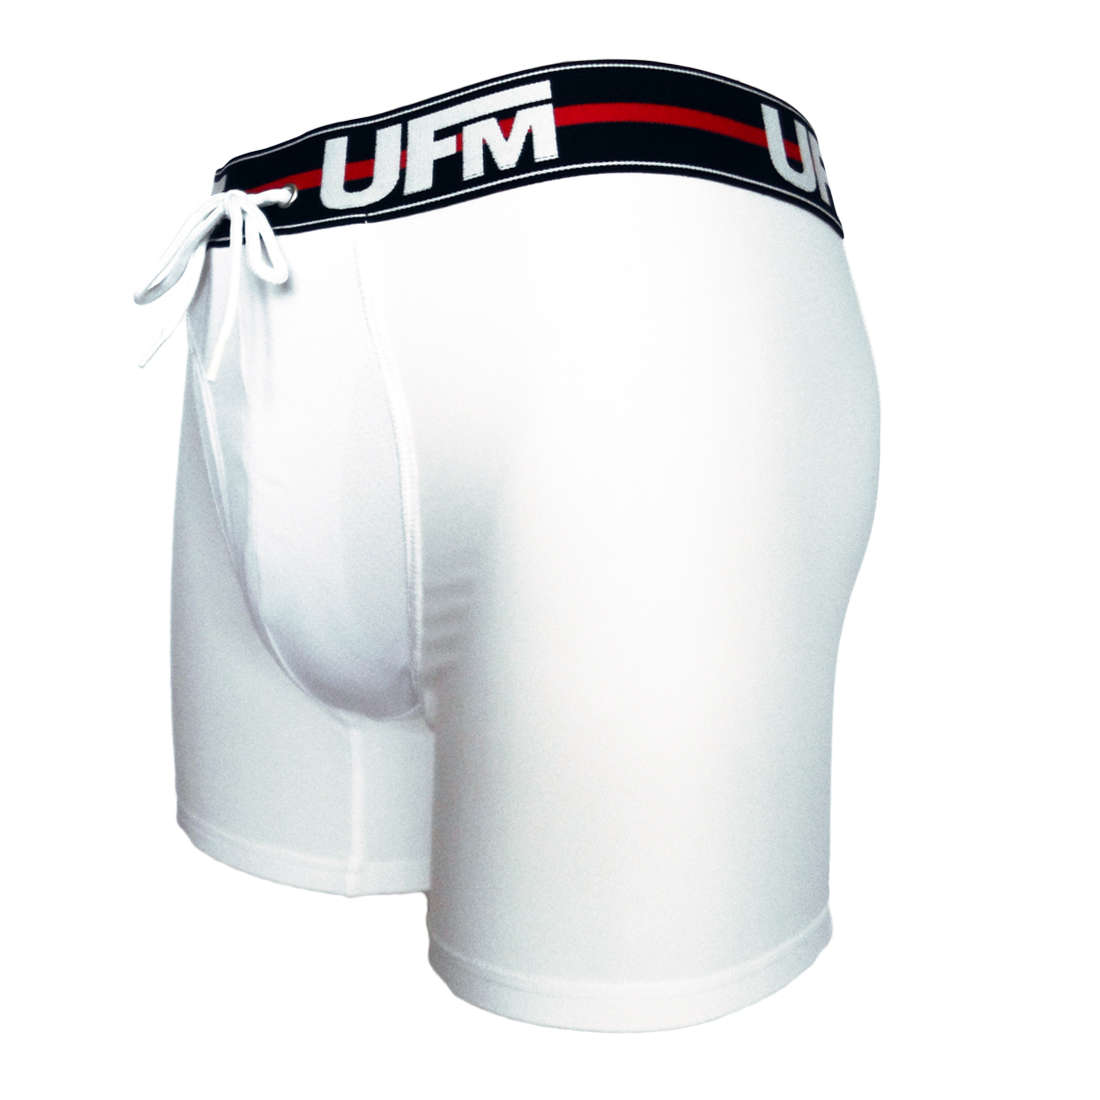 Wholesale Heat Transfer Boxer Briefs For Men And Women White Polyester  Underwear In American Sizes M XXL No Way Home Shorts A12 From  Hc_network004, $2.69